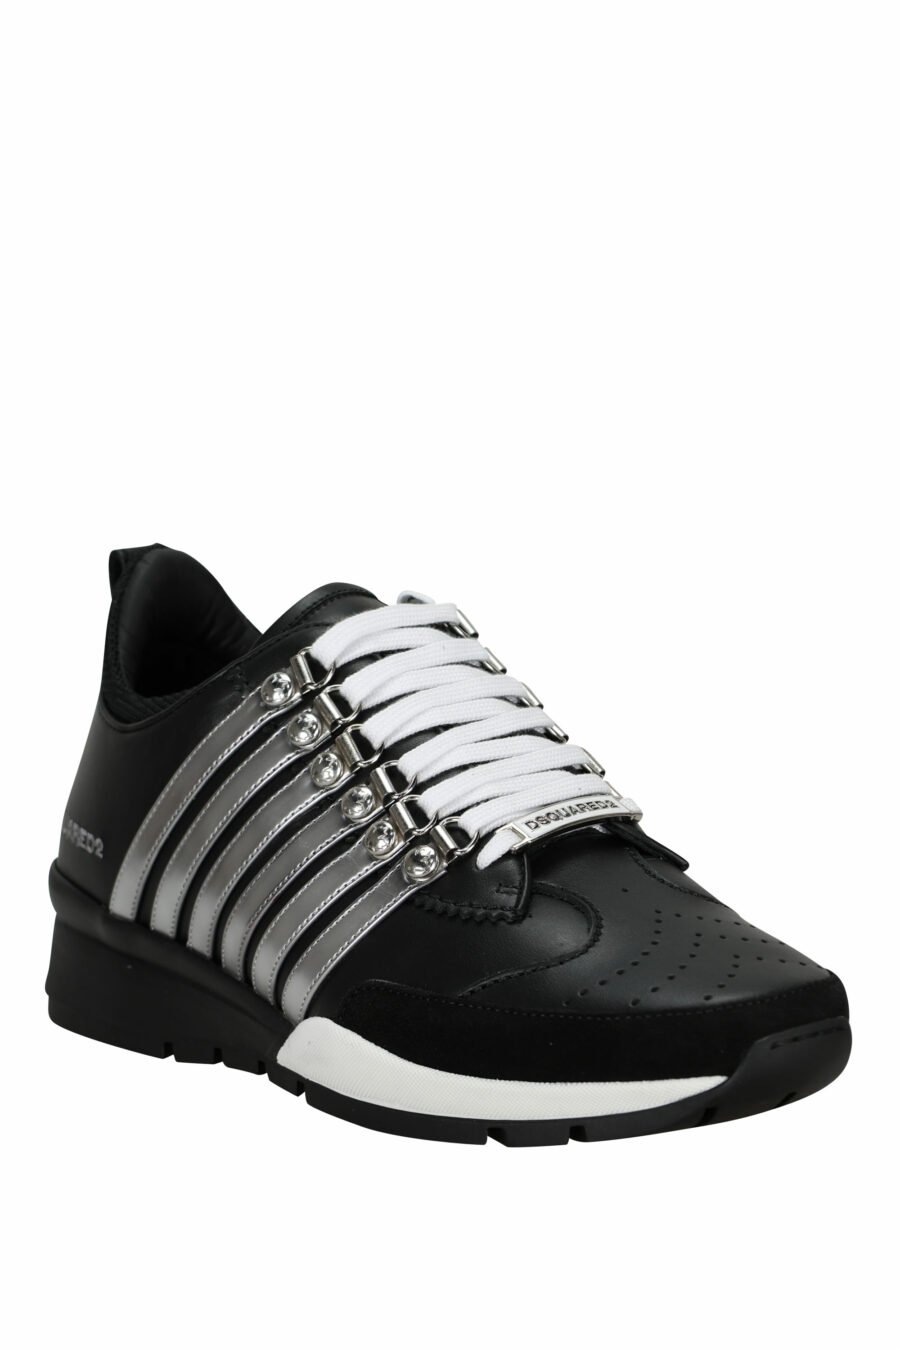 Black trainers with silver lines and bicolour sole - 8055777301289 1